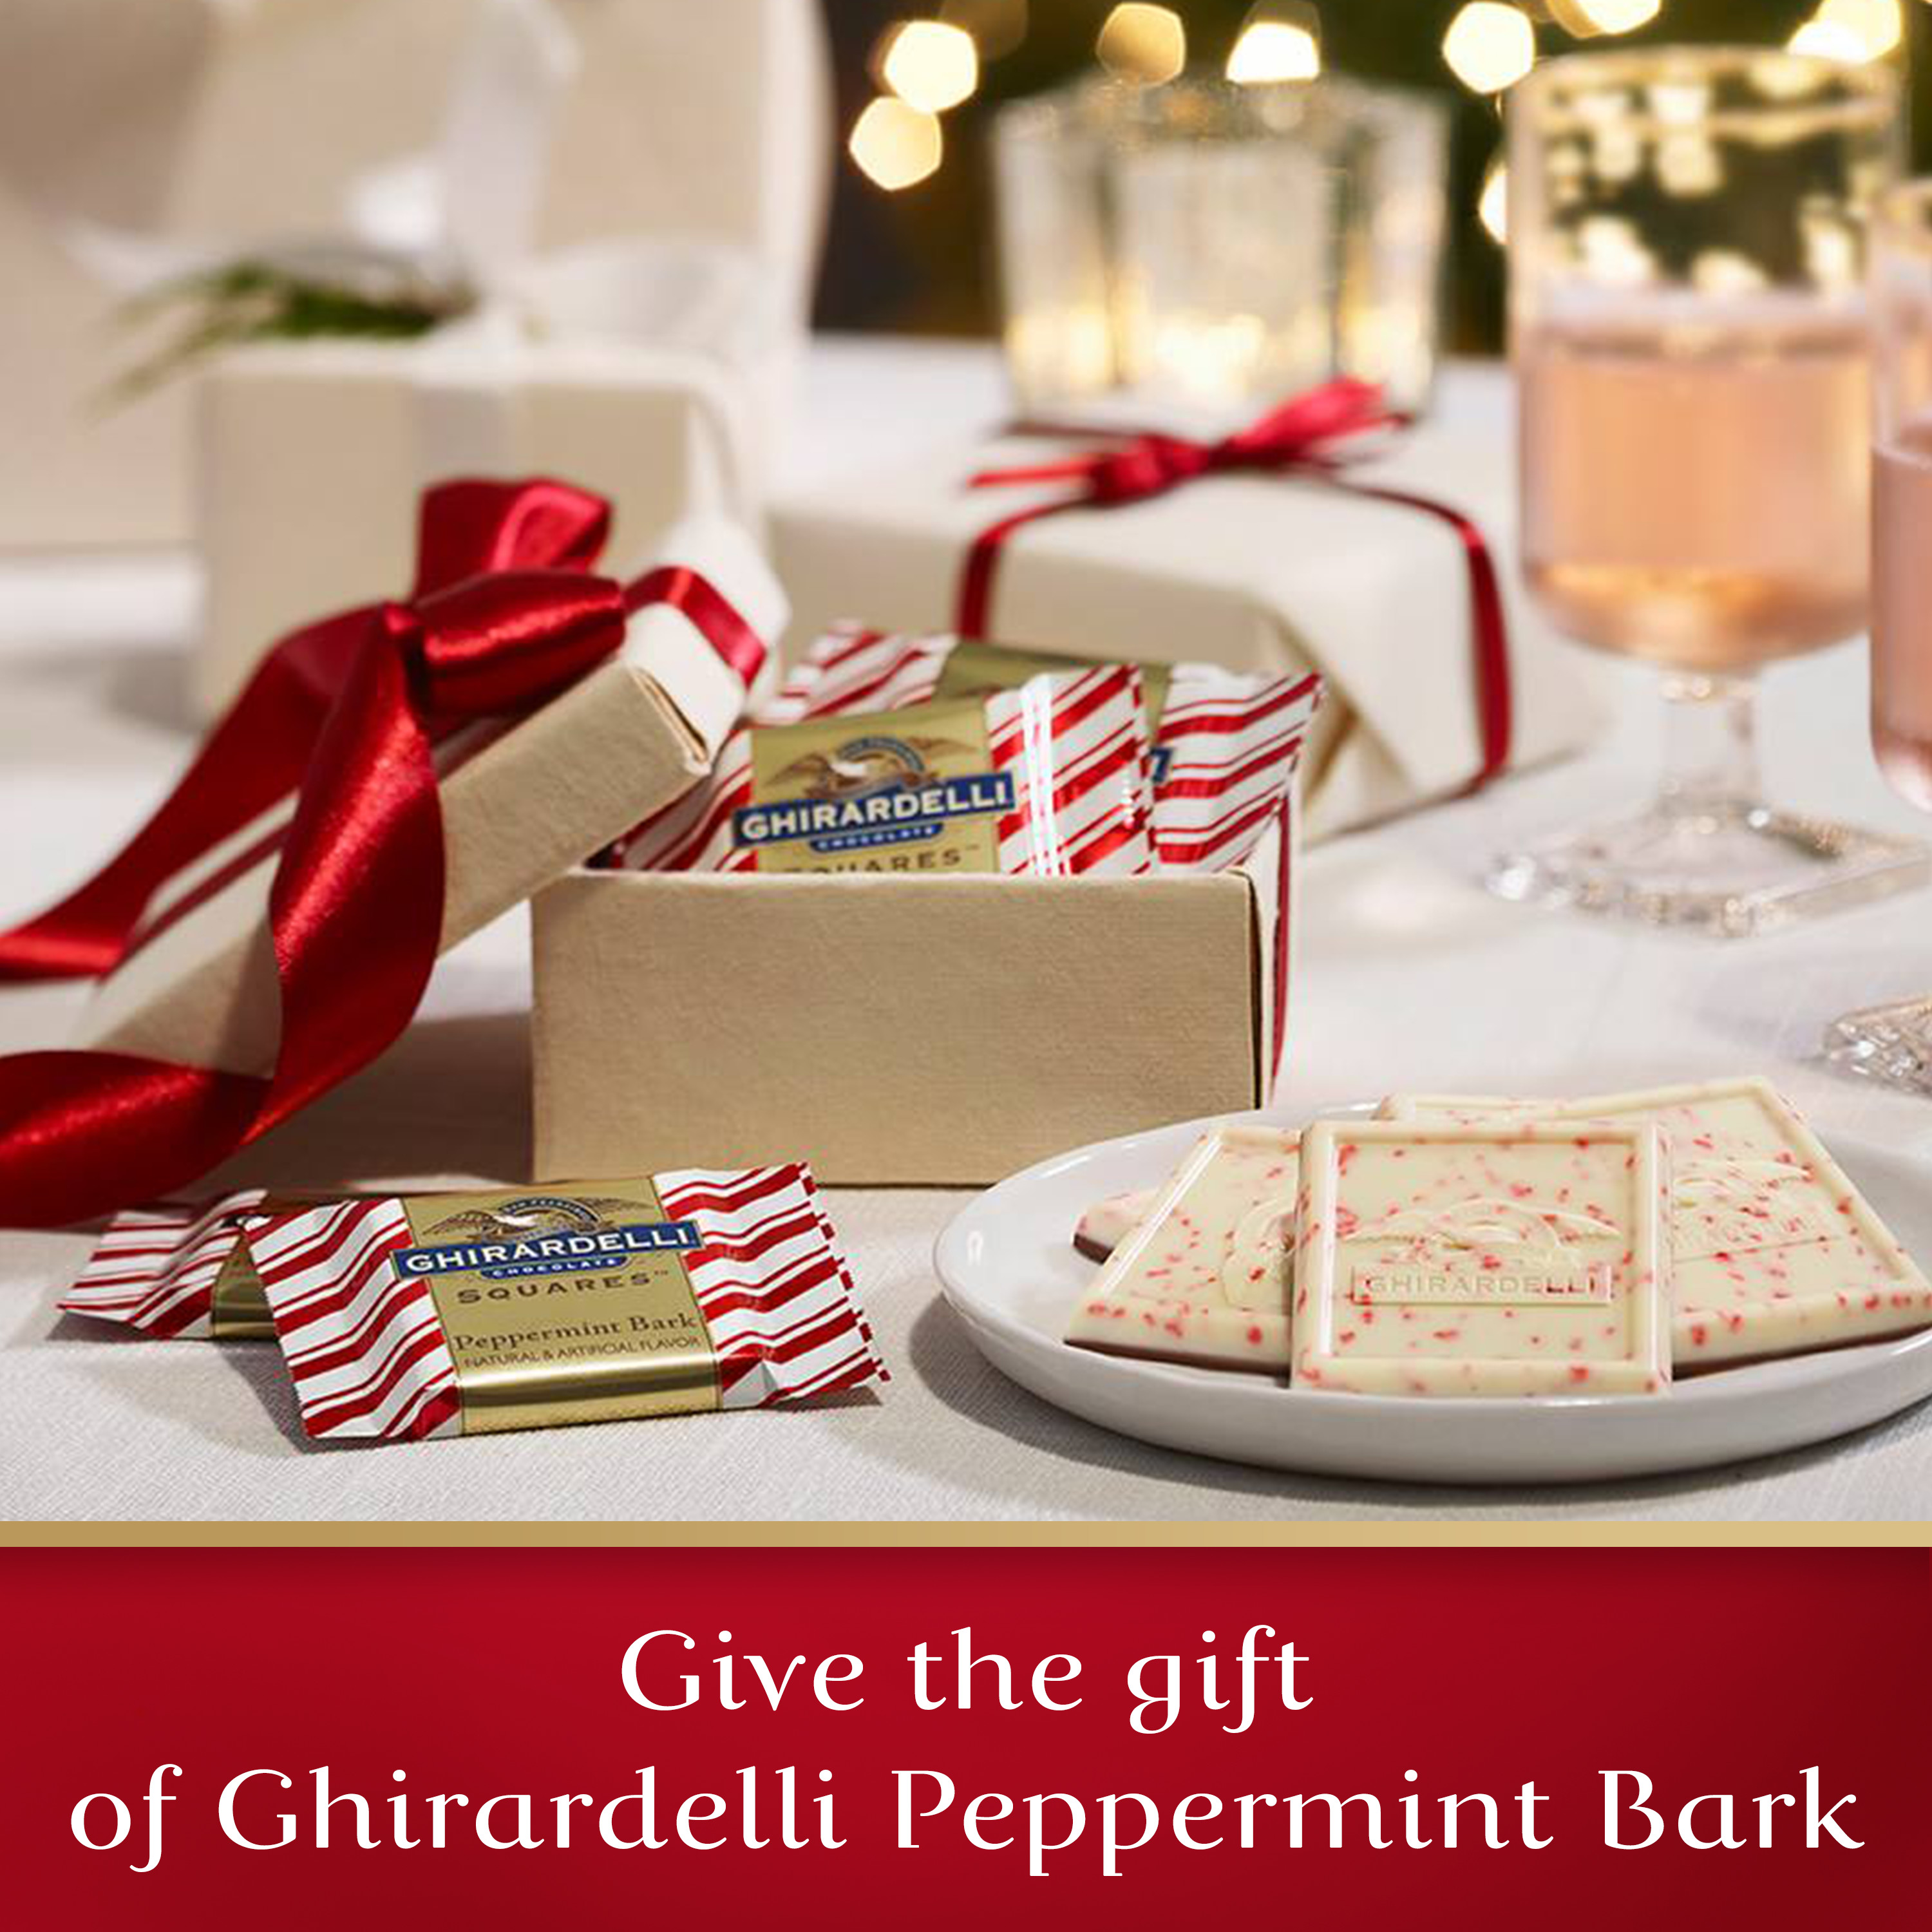 GHIRARDELLI Peppermint Bark Chocolate Squares, 7.9 oz Bag - image 5 of 10